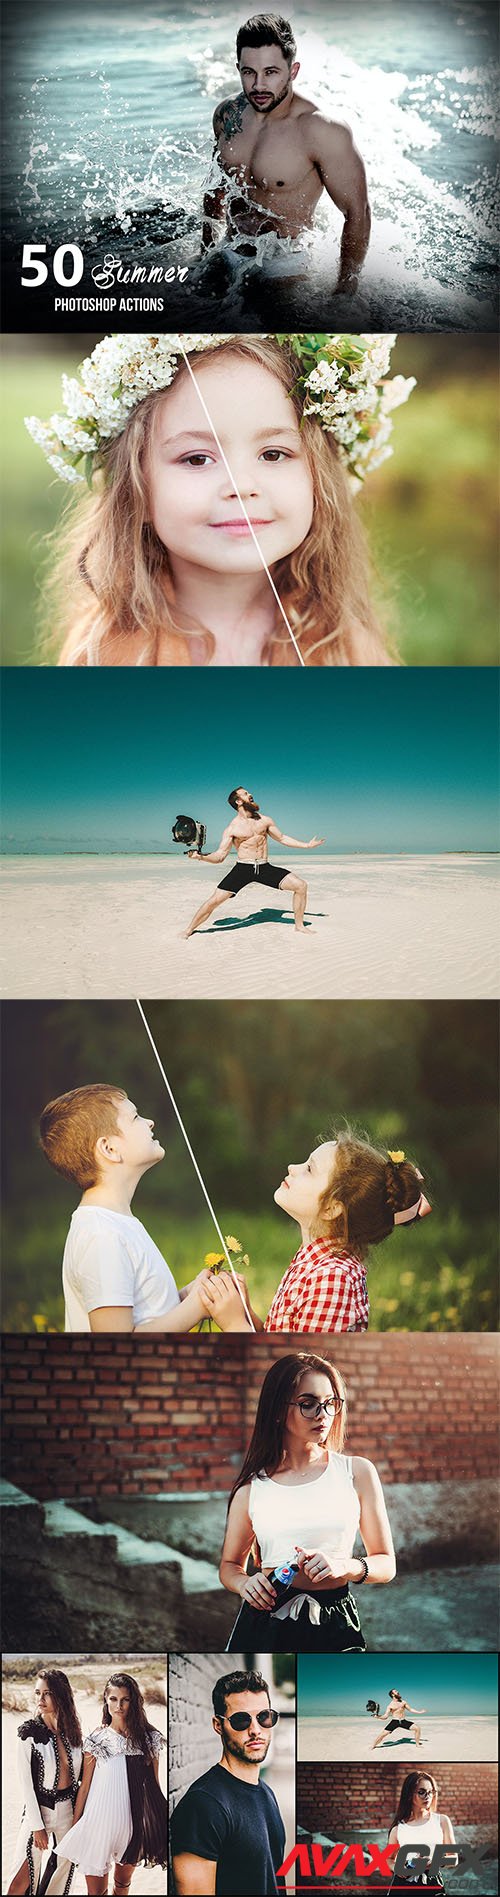 50 Summer Photoshop Actions